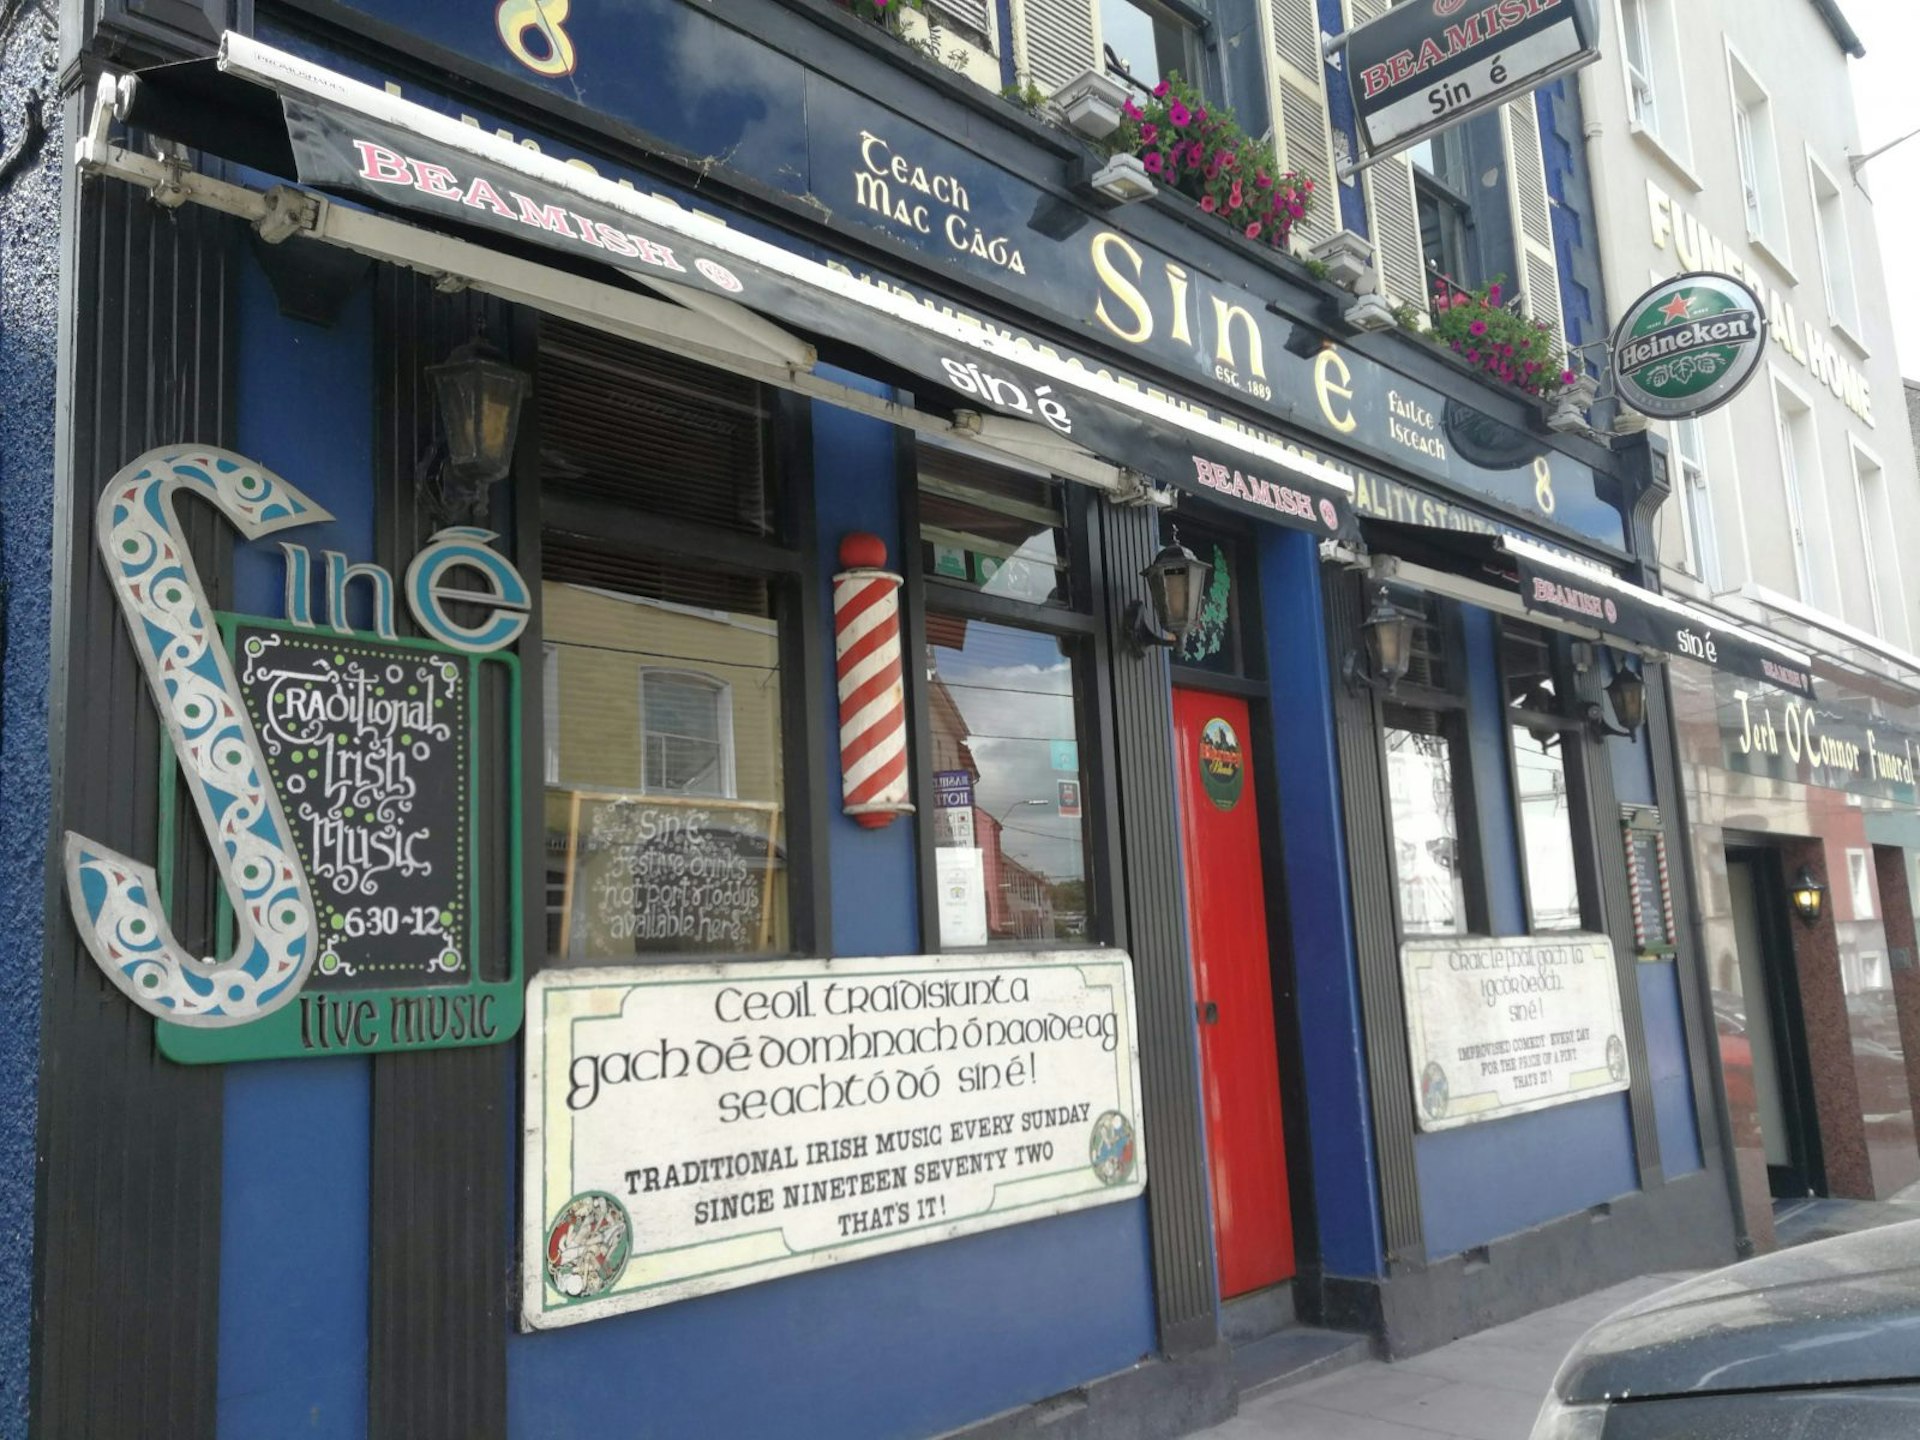 Sin É pub, housed in a blue building with a red door and signs advertising its live music.